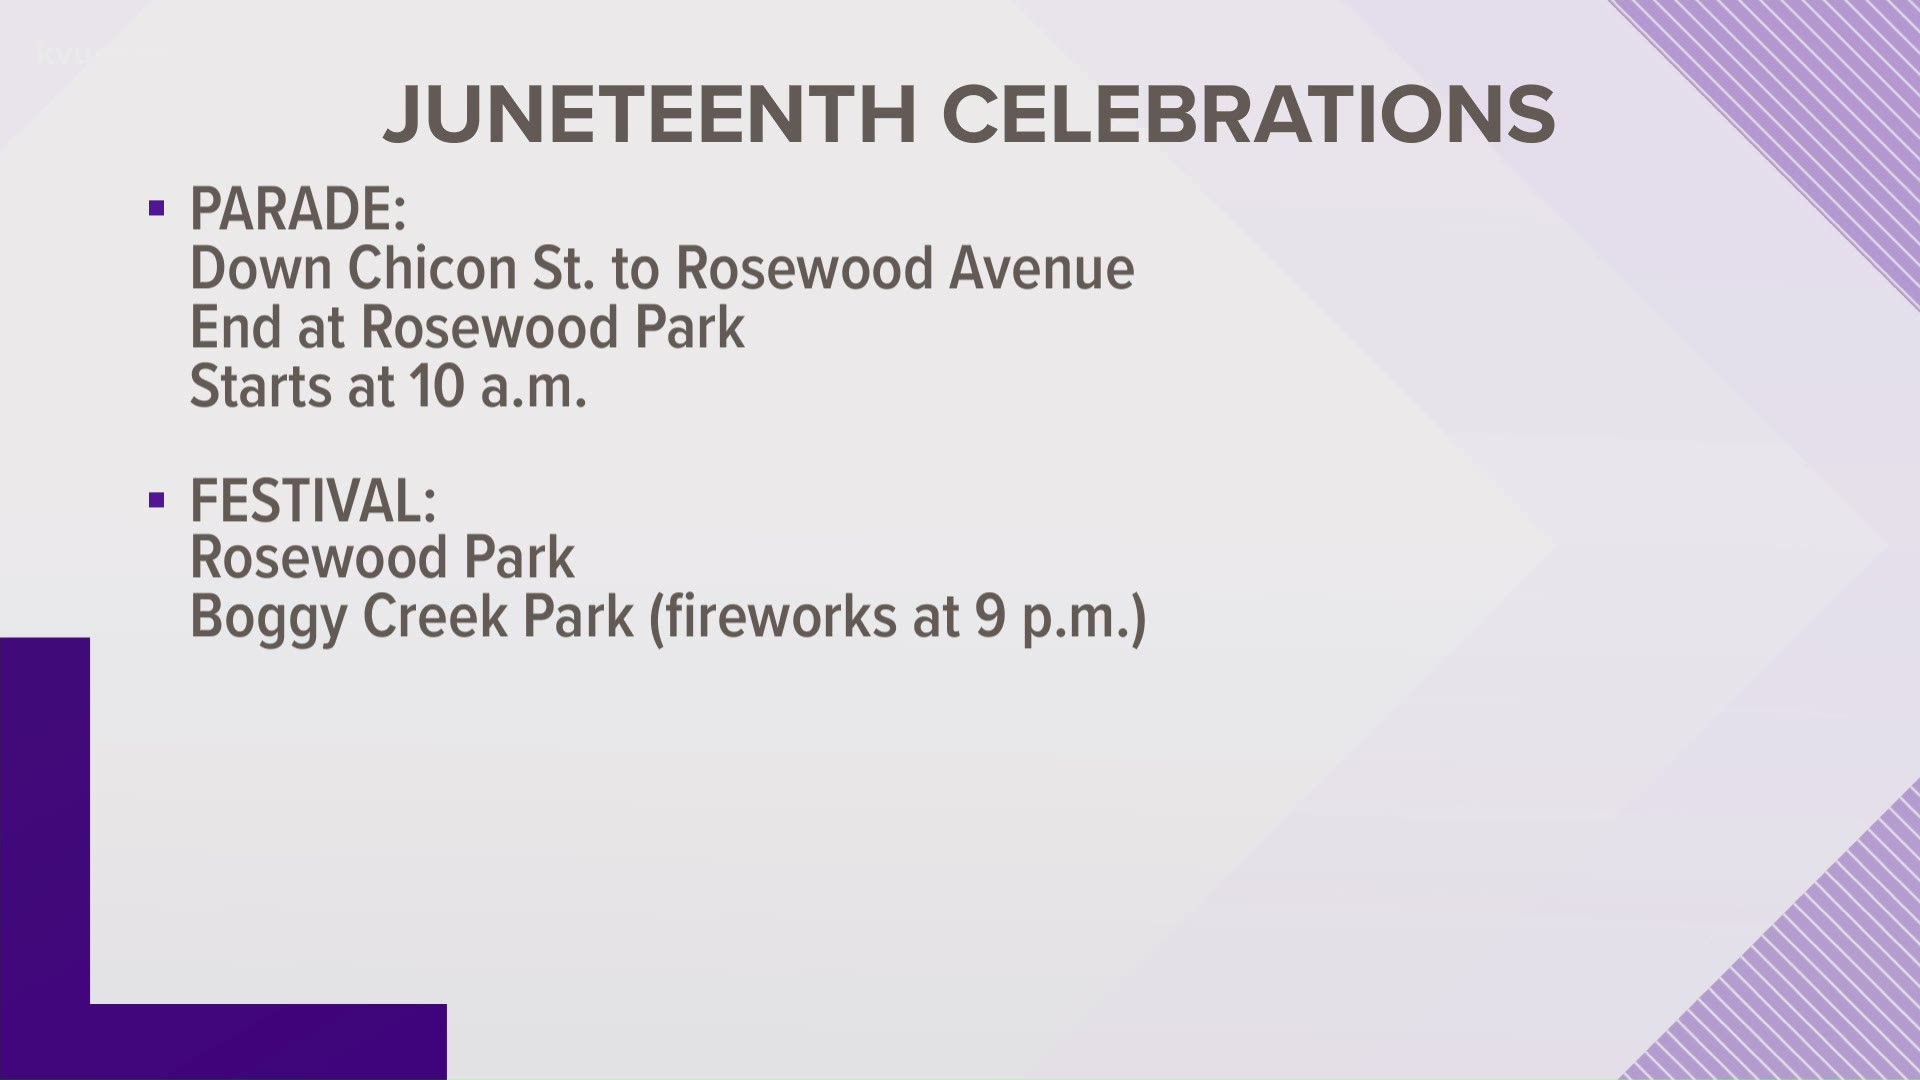 This year marks a special one for Juneteenth celebrations across the city.